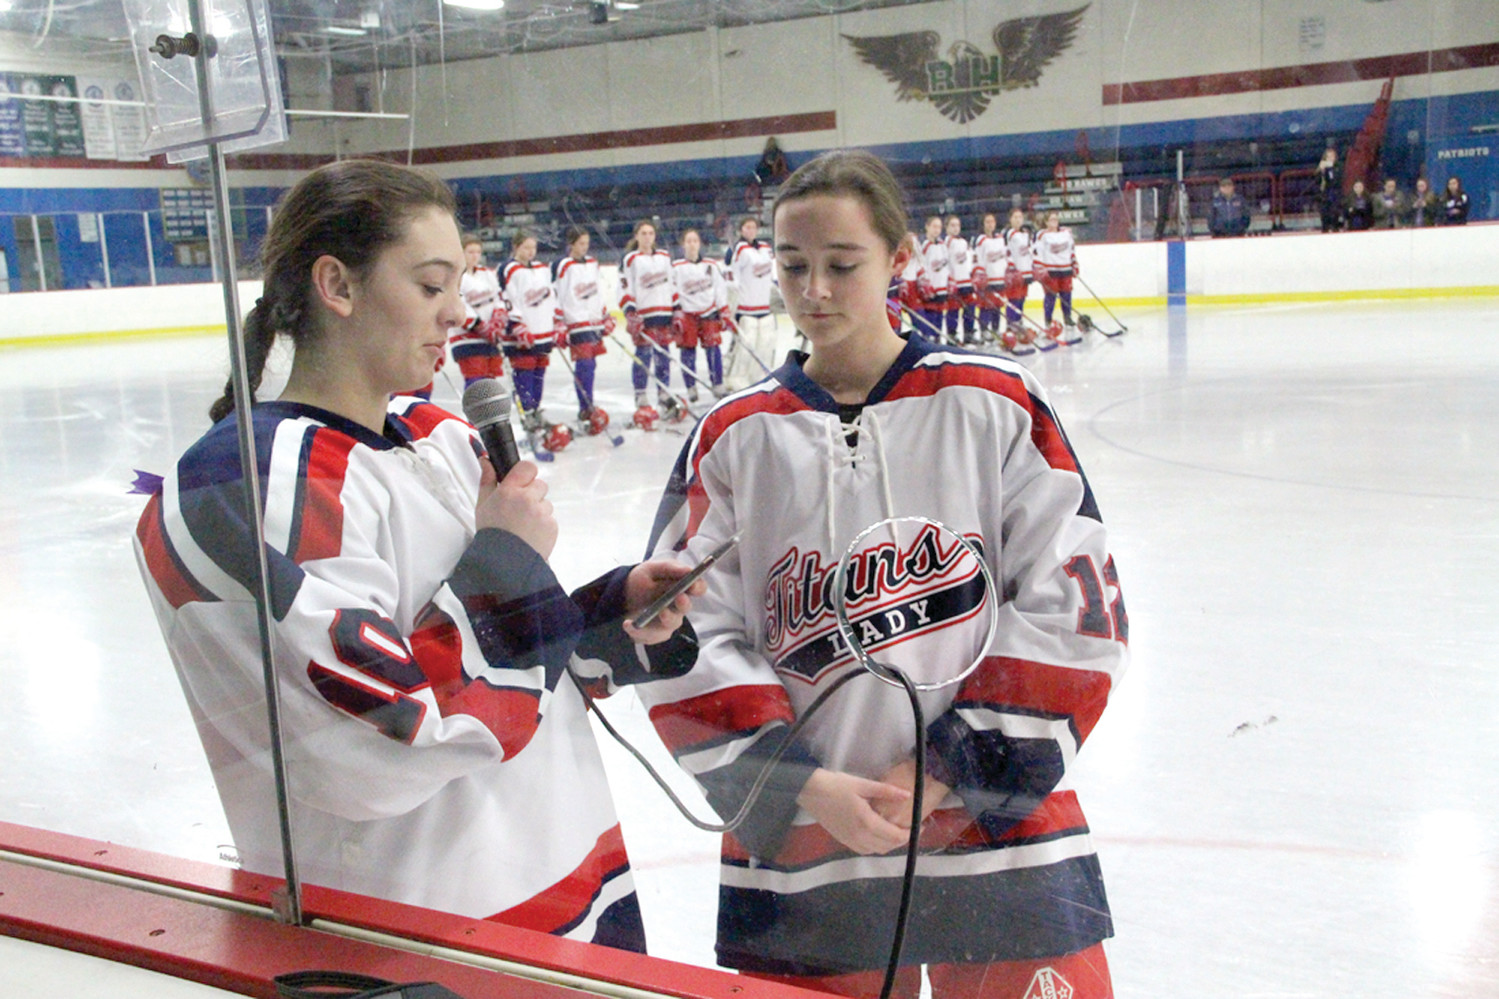 IN TRIBUTE TO GIANNA: Co-captains of the Lady Titans Hockey Tea Shannon McCamish and Elise Saccoccia read tributes to Gianna in a ceremony preceding their game with Mount St. Charles.